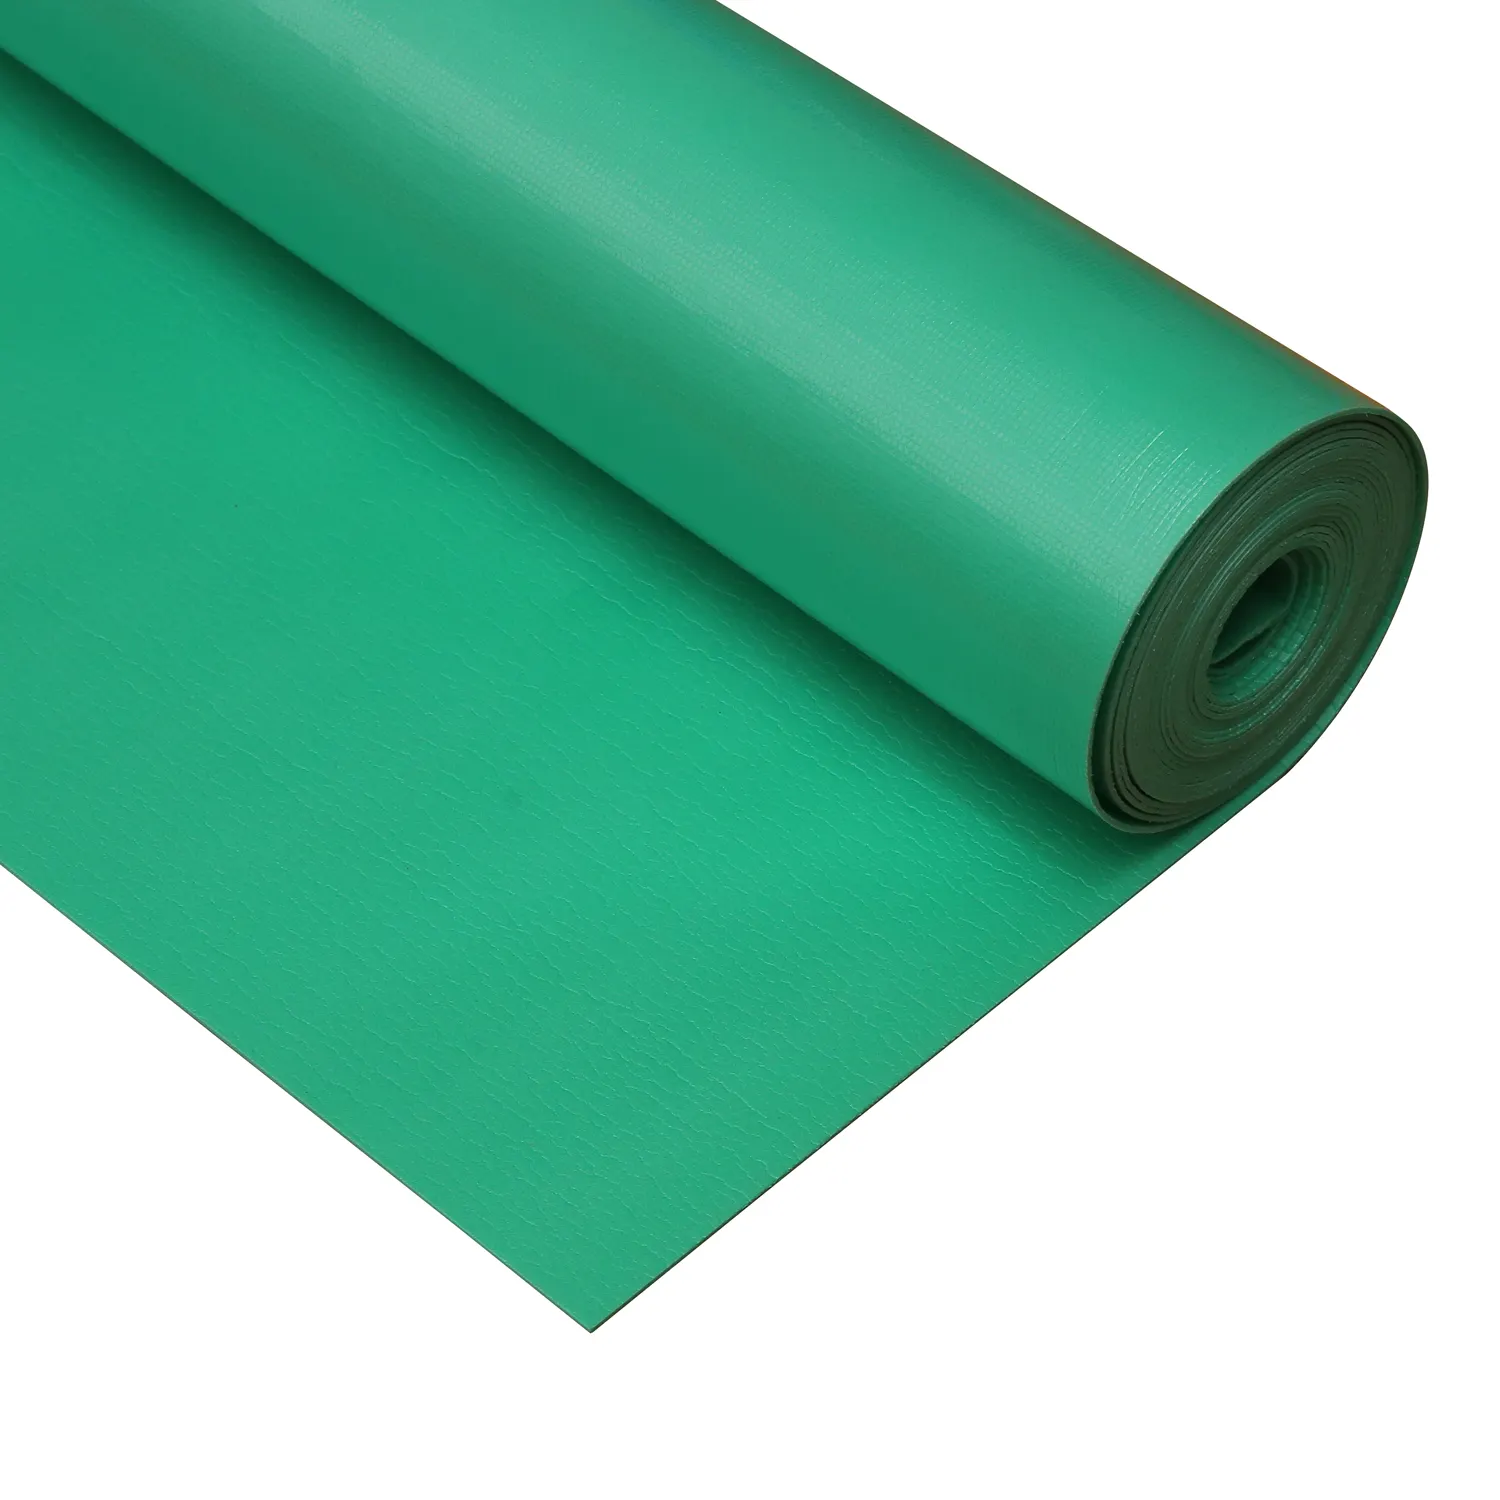 Wholesale Flooring Carpet Underlay Foam Rubber IXPE Foam Padding Recycled Attached Pad